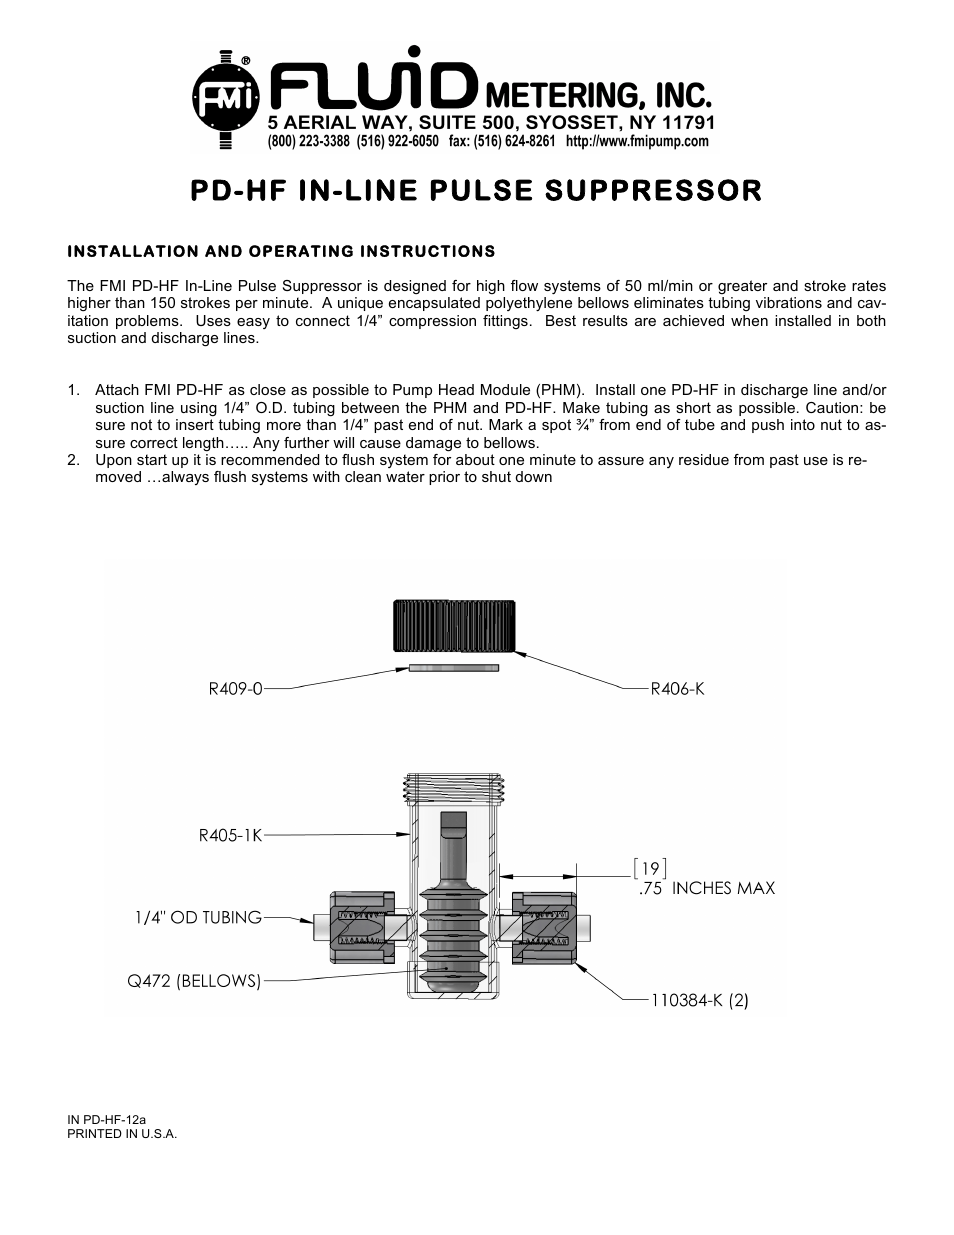 PD-HF In-line Pulse